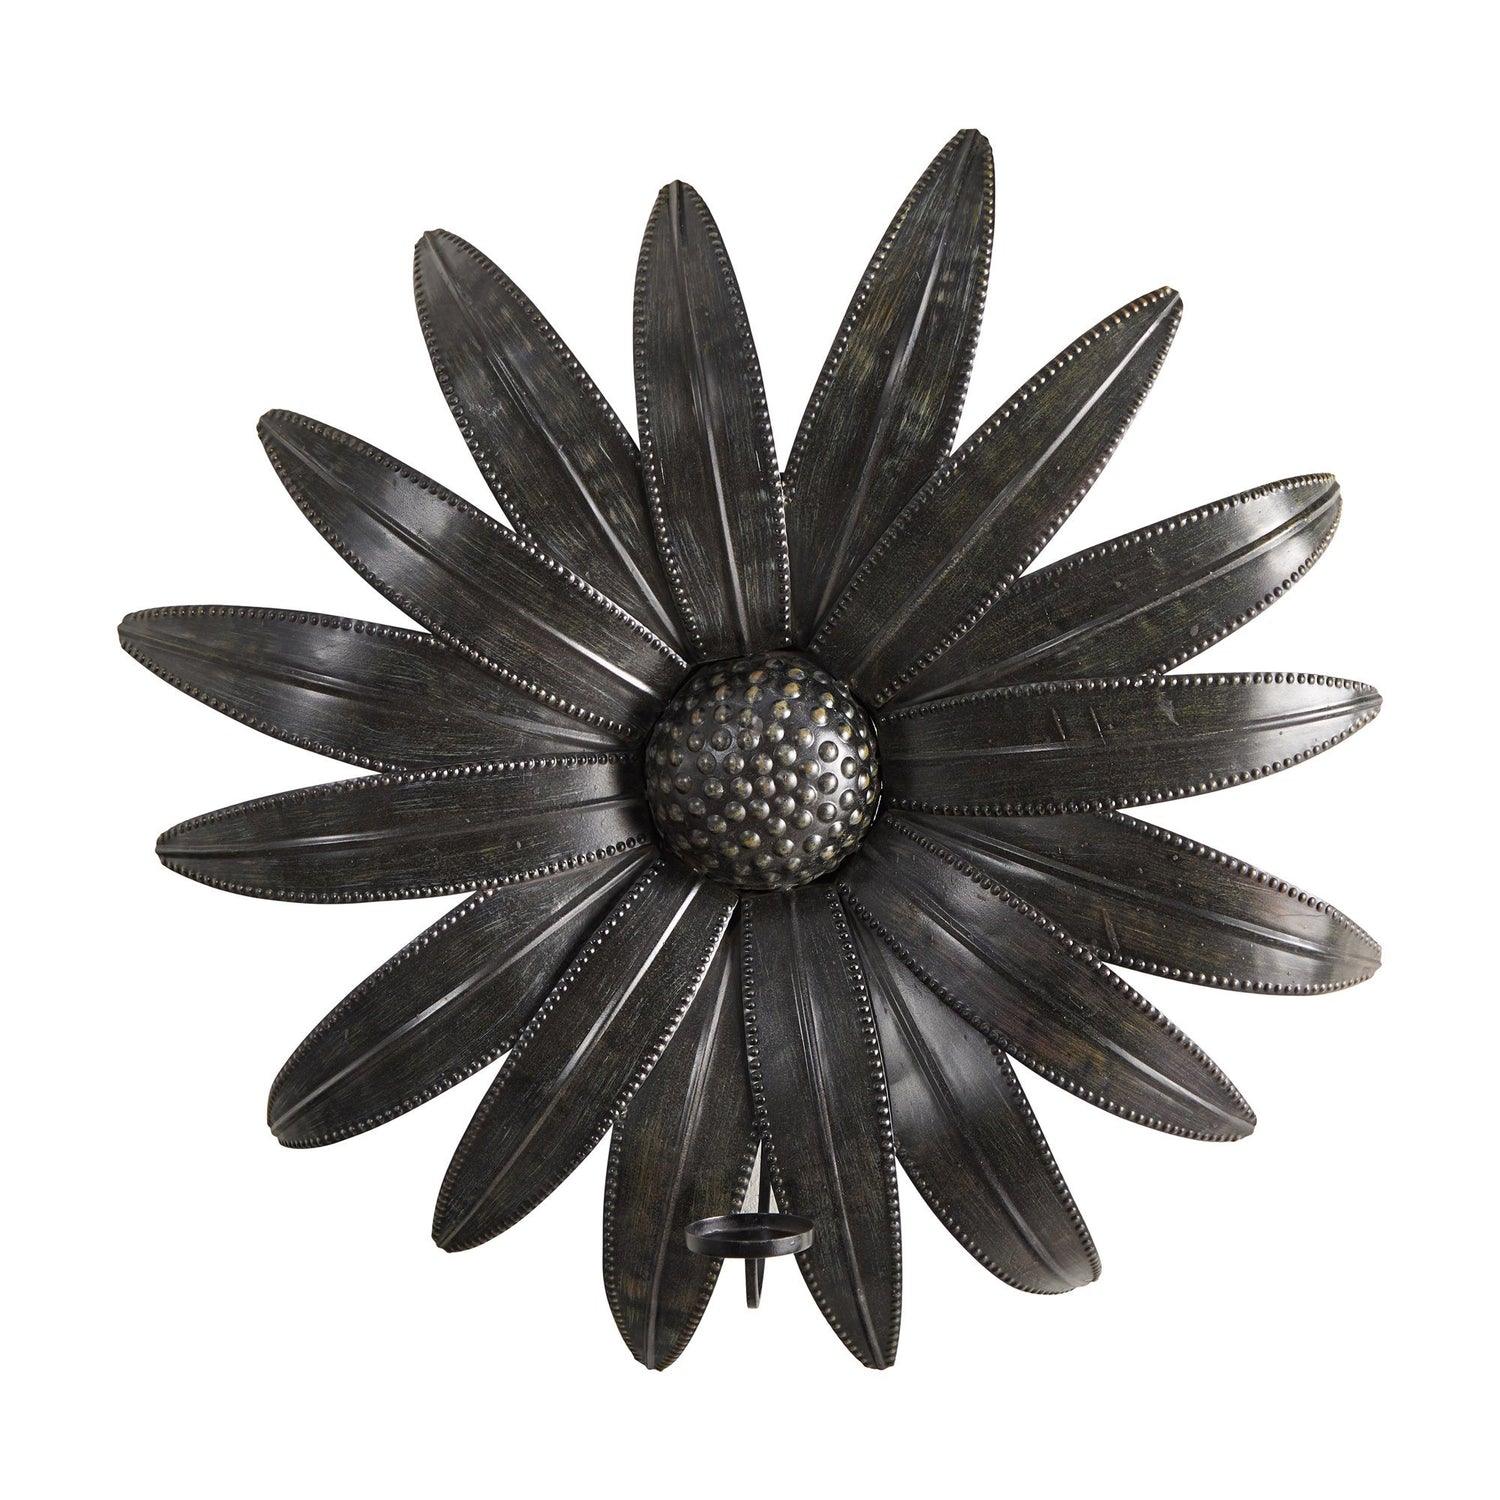 30” x 30” Brushed Metal Daisy Flower Sconce Candle Holder Wall Art Decor